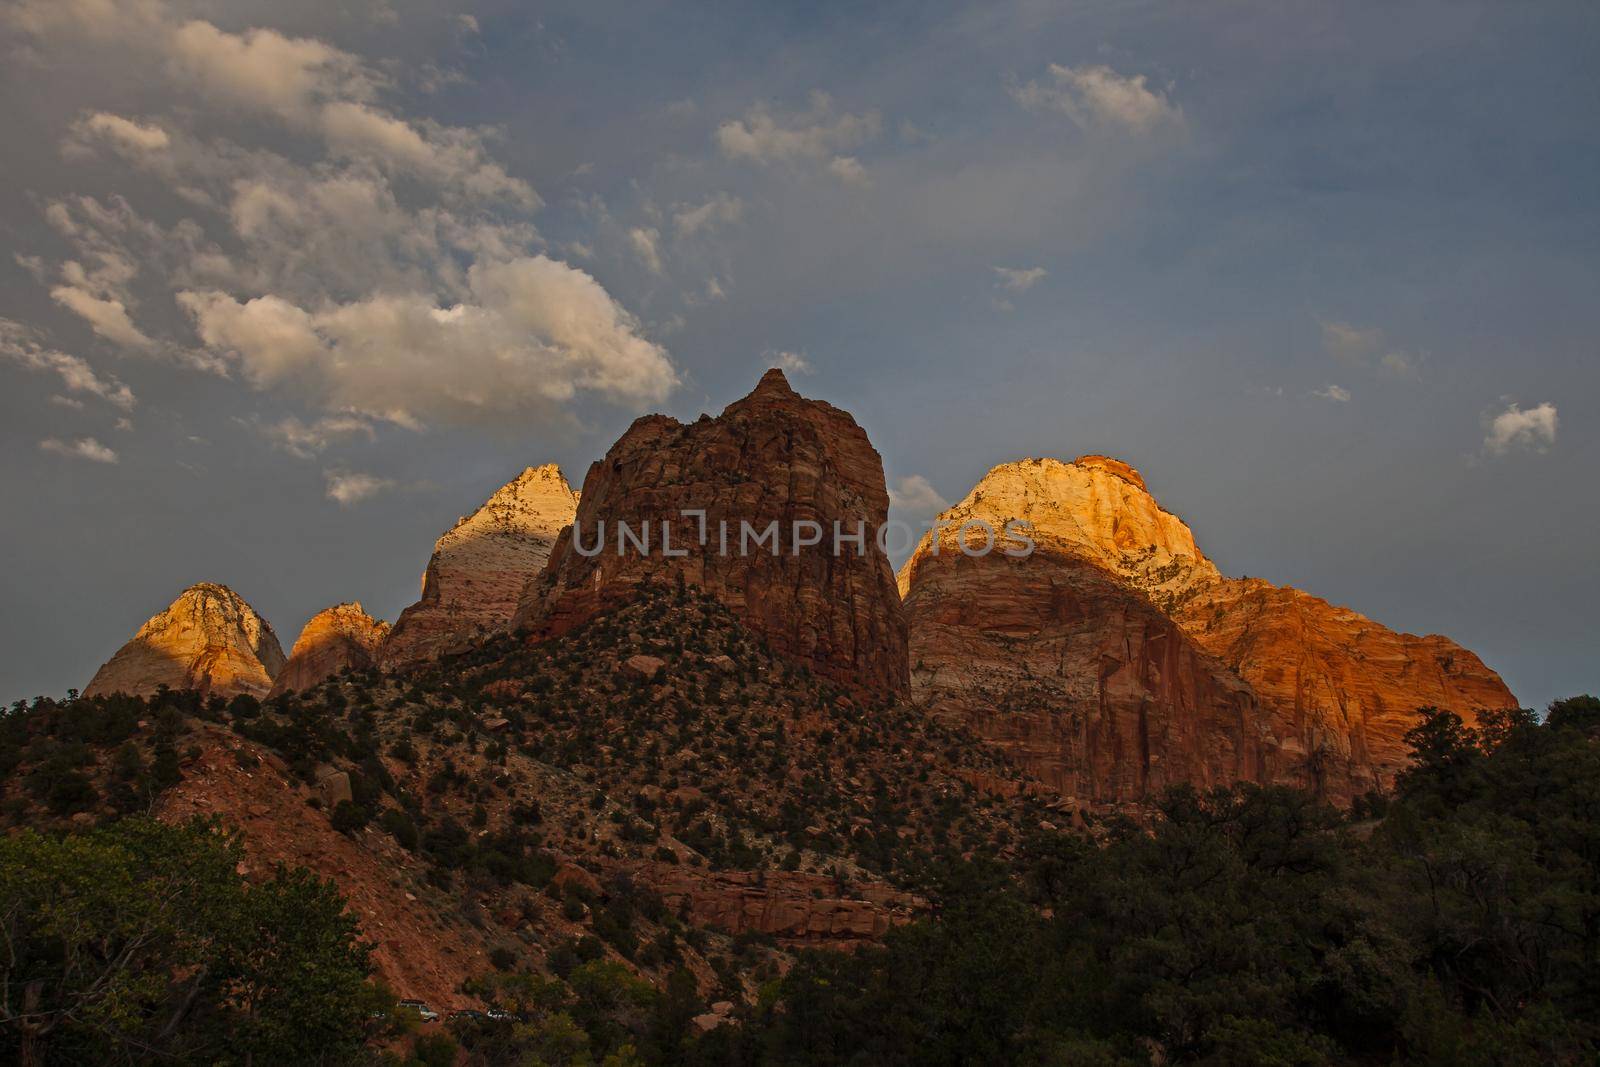 Zion landscape along the Pa'rus trail in Zion National Park 2699 by kobus_peche